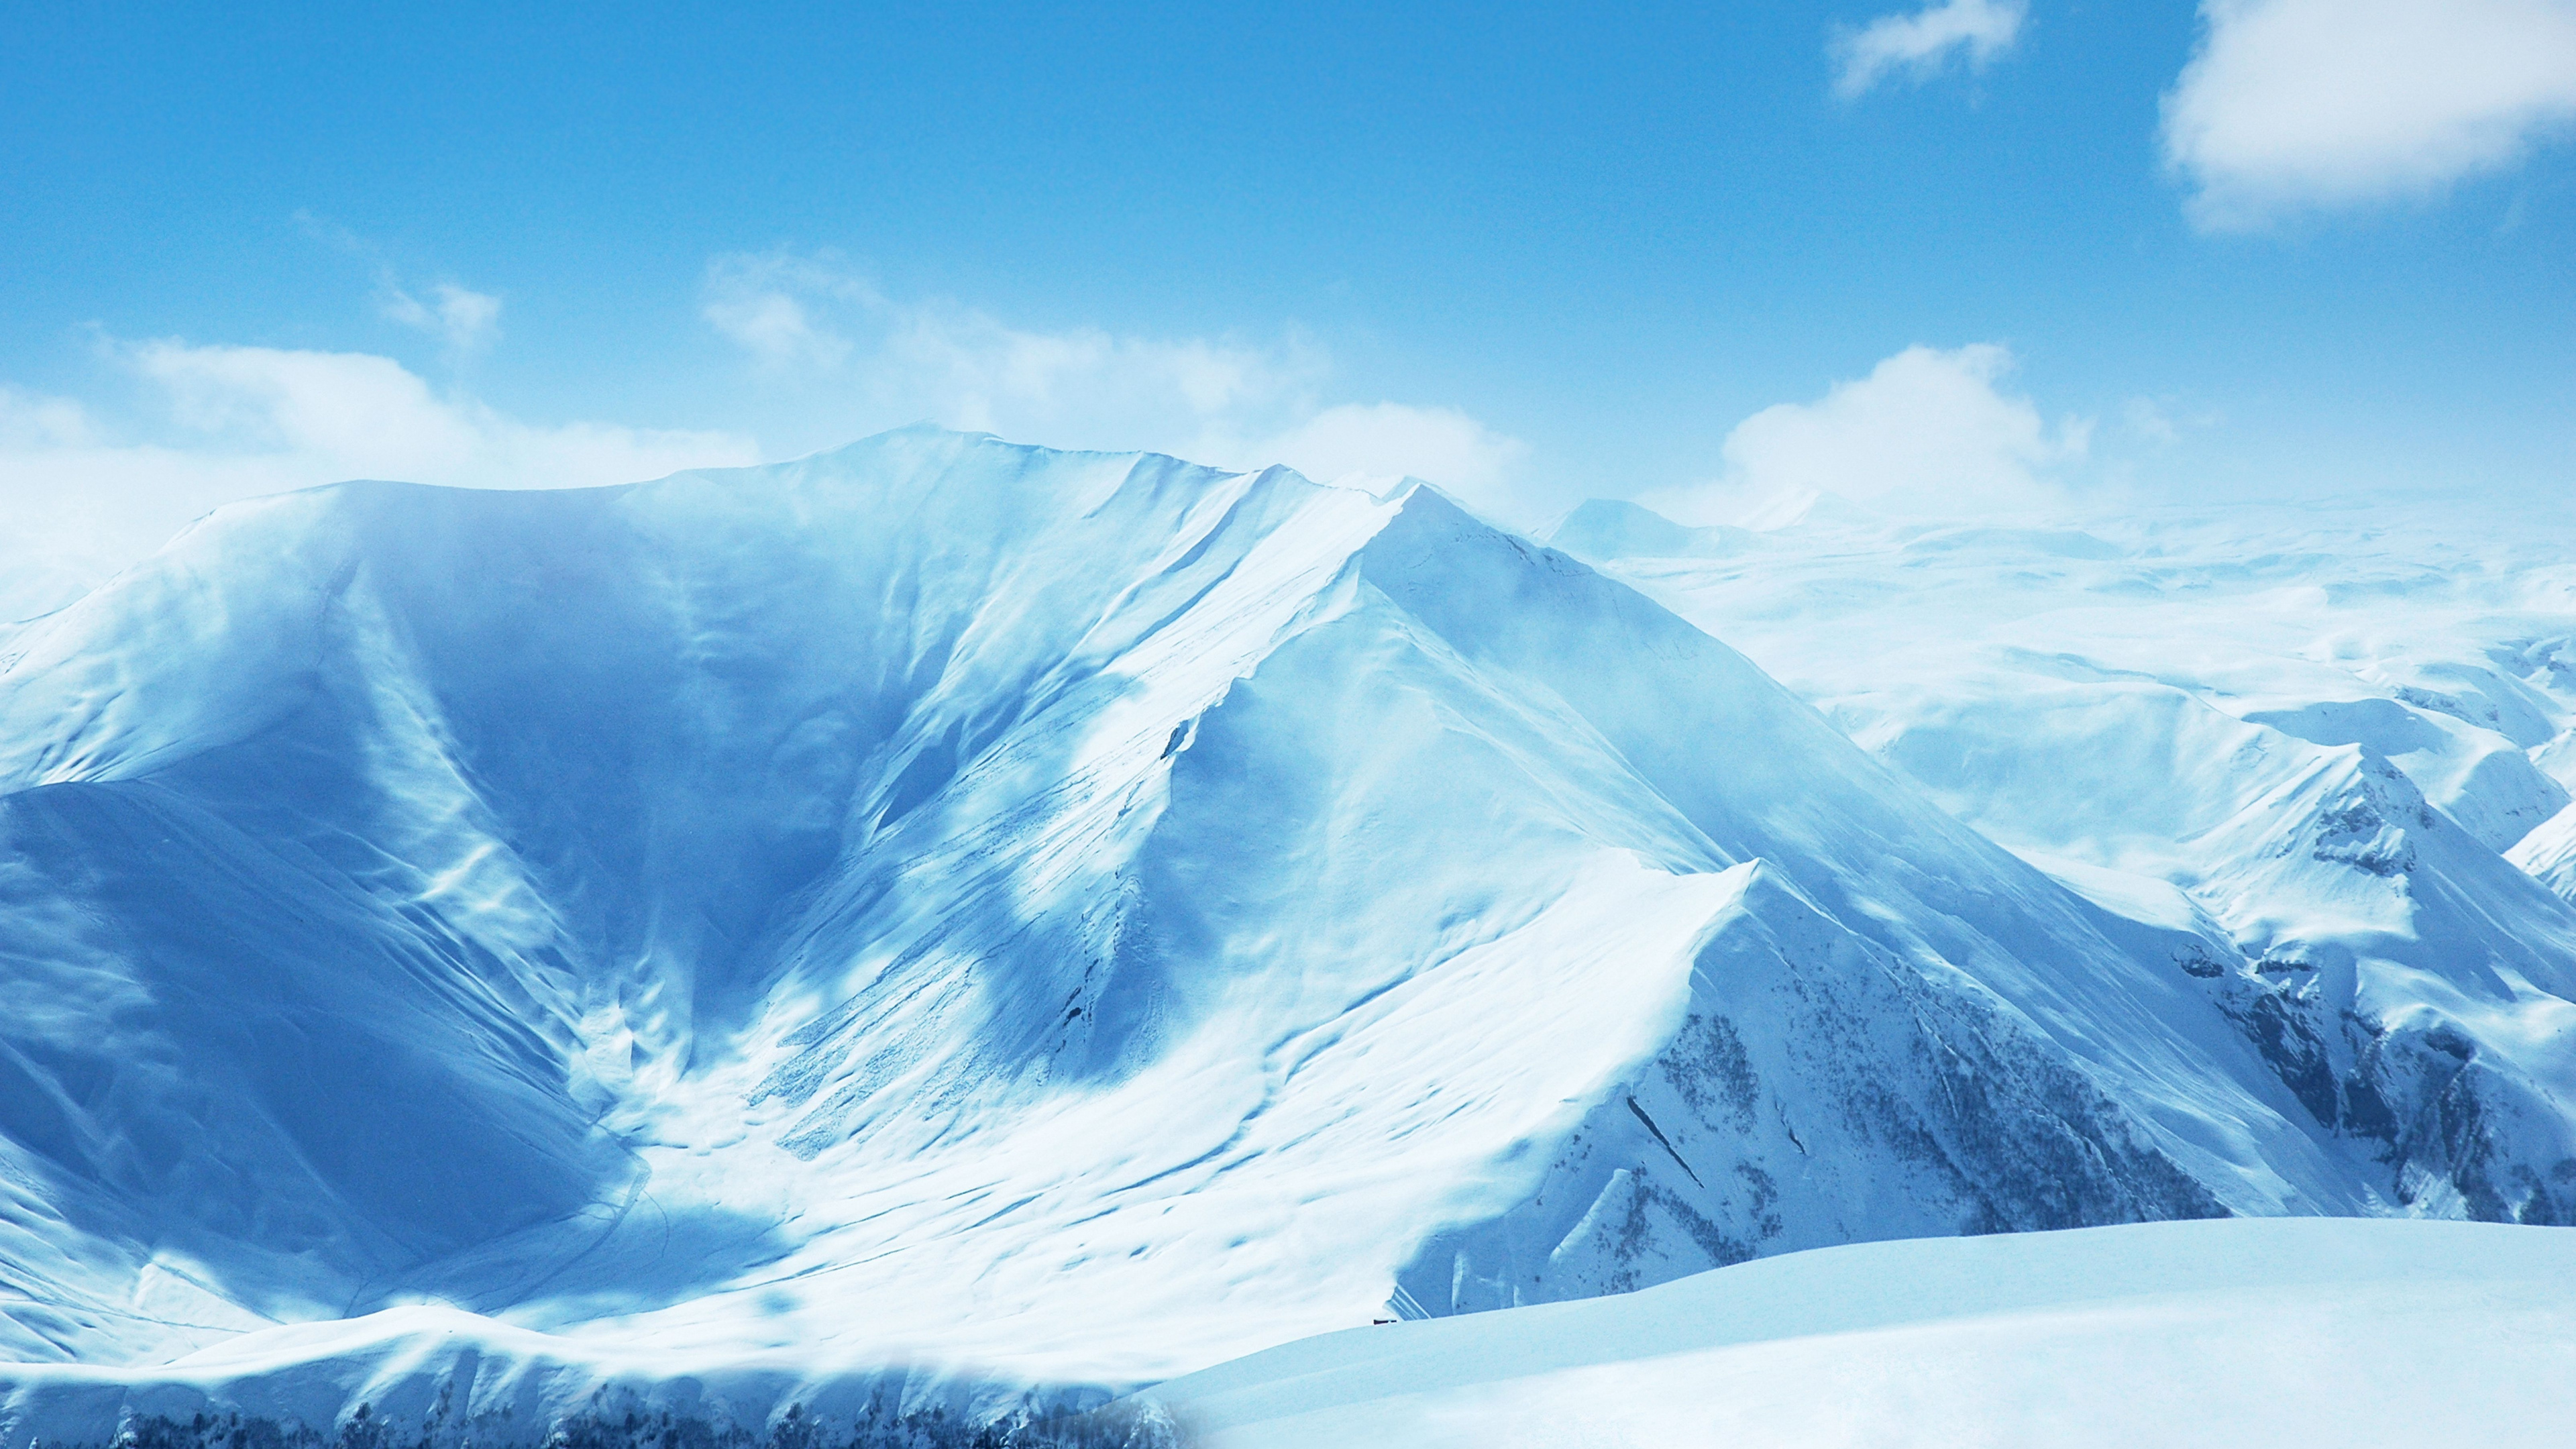 Snow Covered Mountain Under Blue Sky. Wallpaper in 3840x2160 Resolution